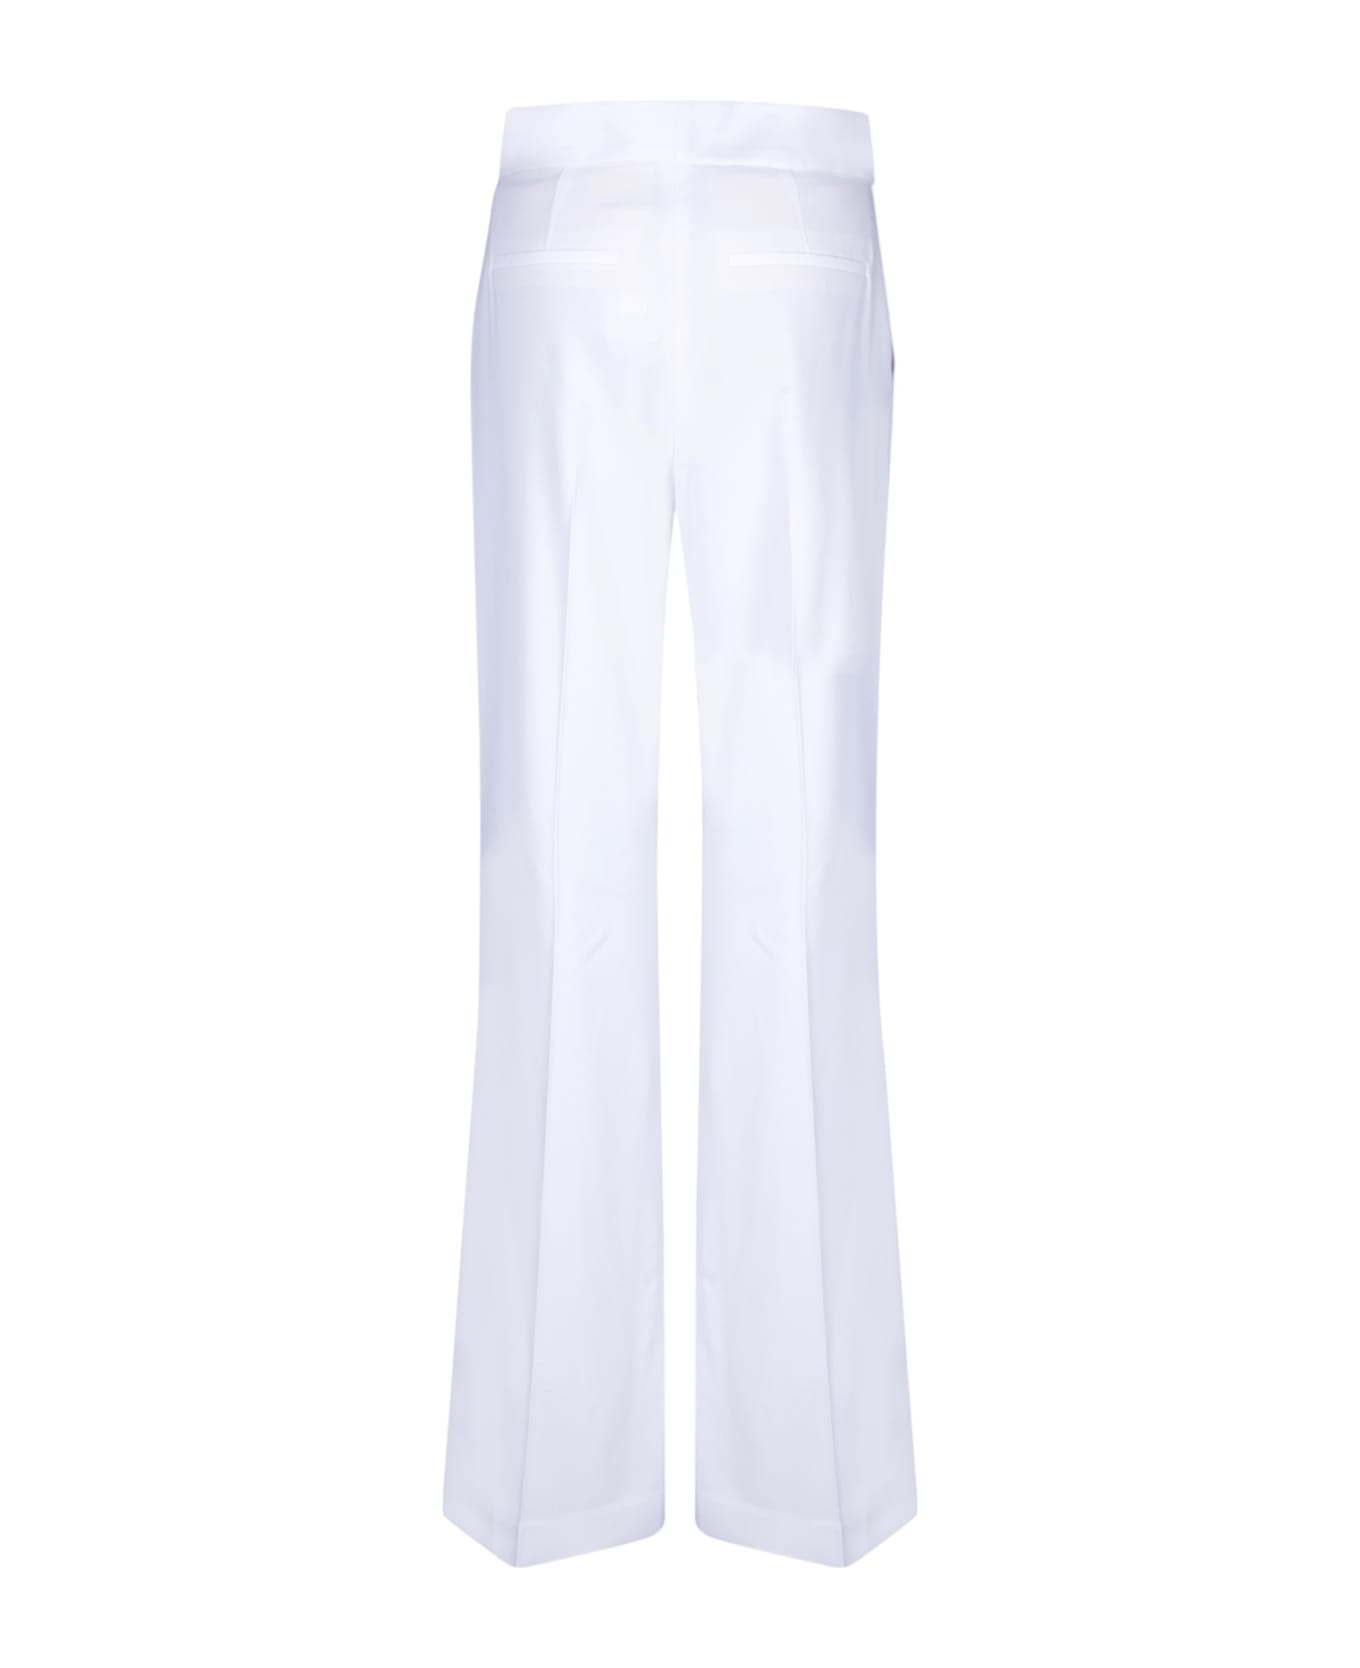 Alice + Olivia White Dylan Crepe Trousers - White